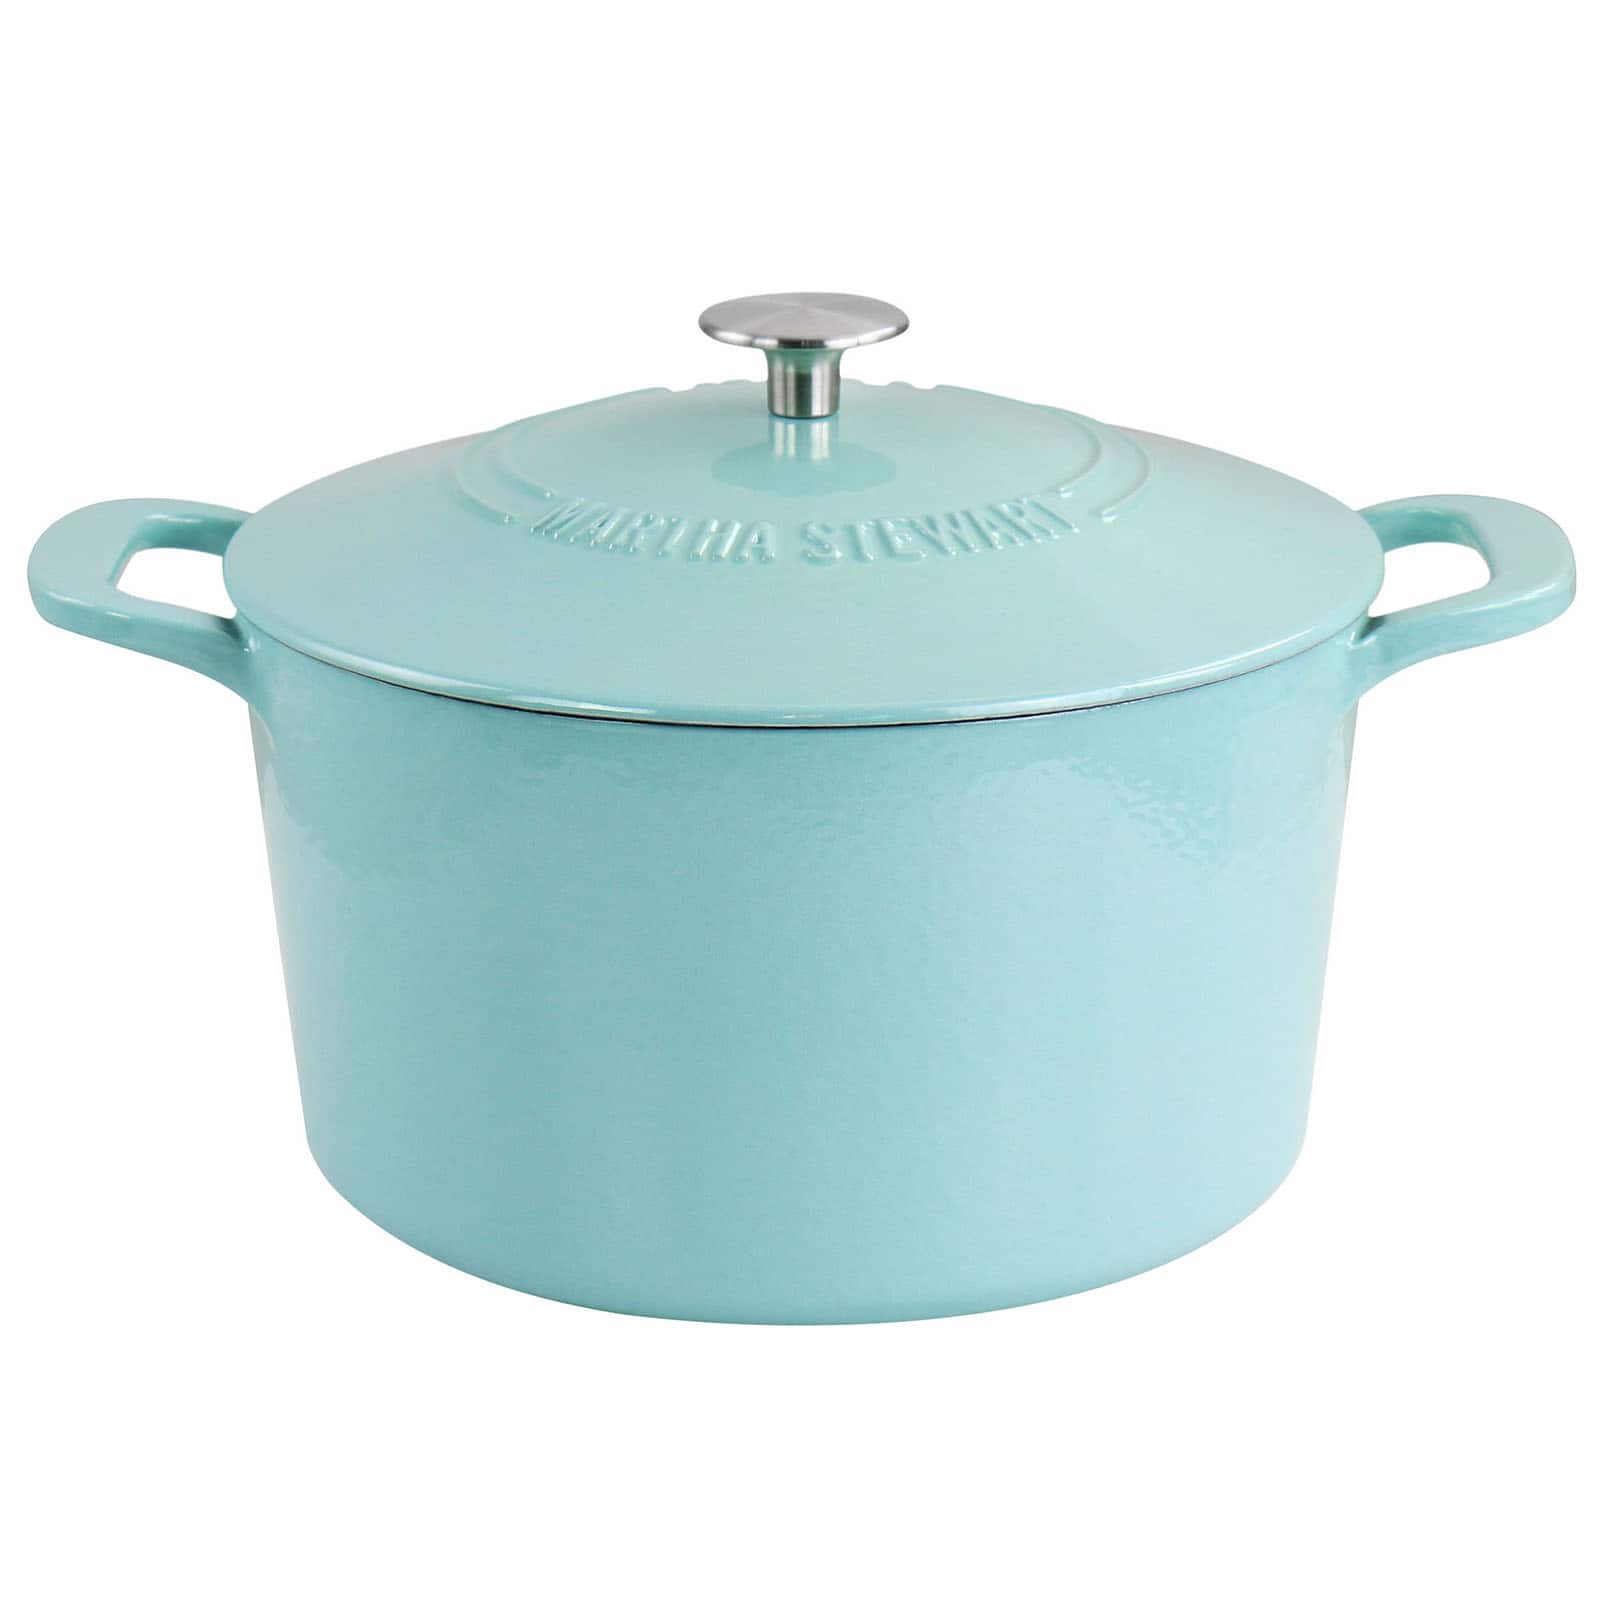 Martha Stewart Enameled Cast Iron Embossed Dutch Oven With Lid 7